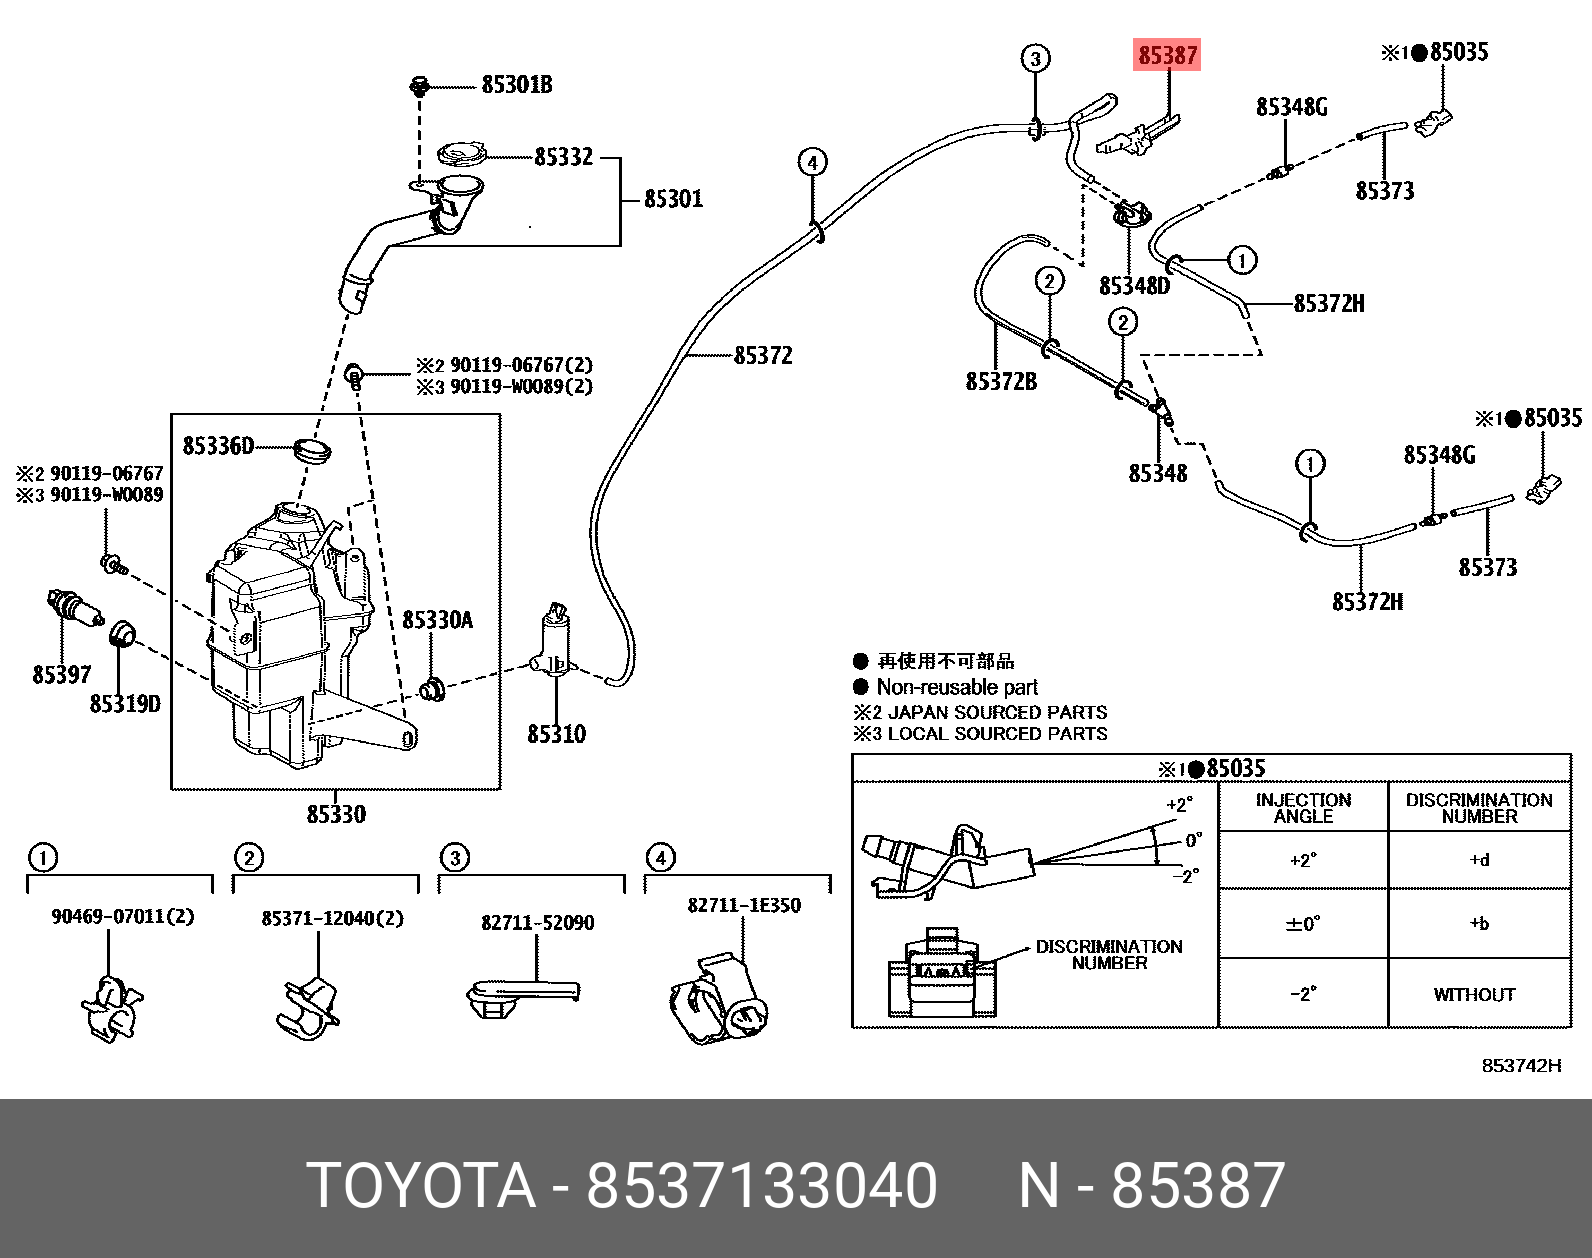 CAMRY 201706-, CLAMP NO.1 (FOR WINDSEIELD WASHER)